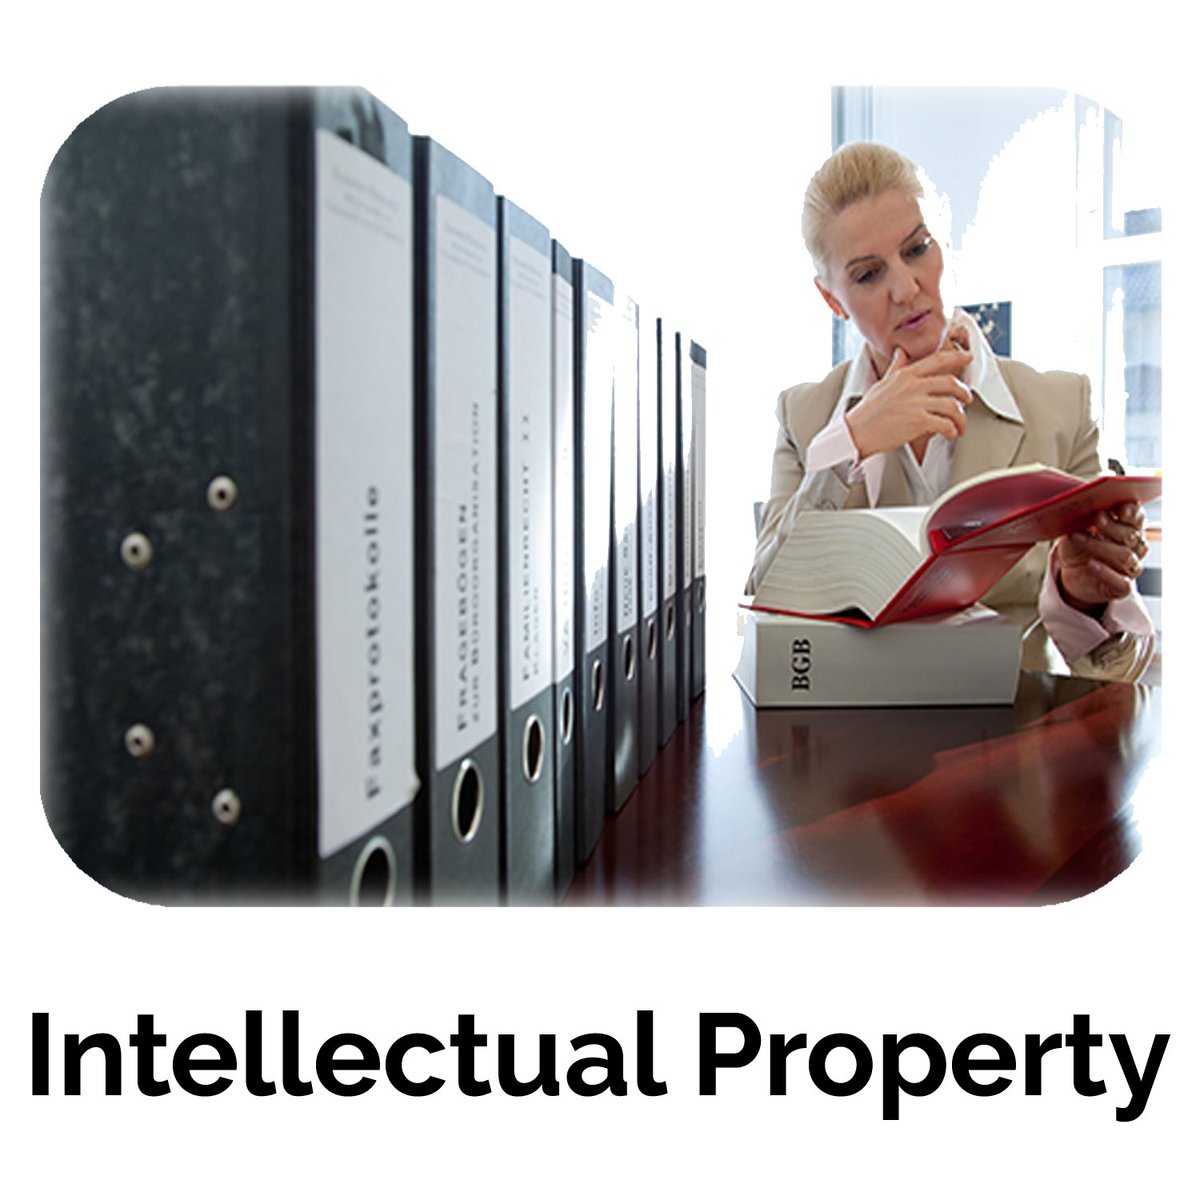 Liat can help you protect your Intellectual Property. 
⠀⠀⠀⠀⠀
#liatlaw #attorney #lawyer #lawoffice #losangeles #sfv #sanfernandovalley #intellectualproperty #intellectualpropertyattorney #copyrightattorney #trademarkattorney #ndaagreements #confidentialityagreements